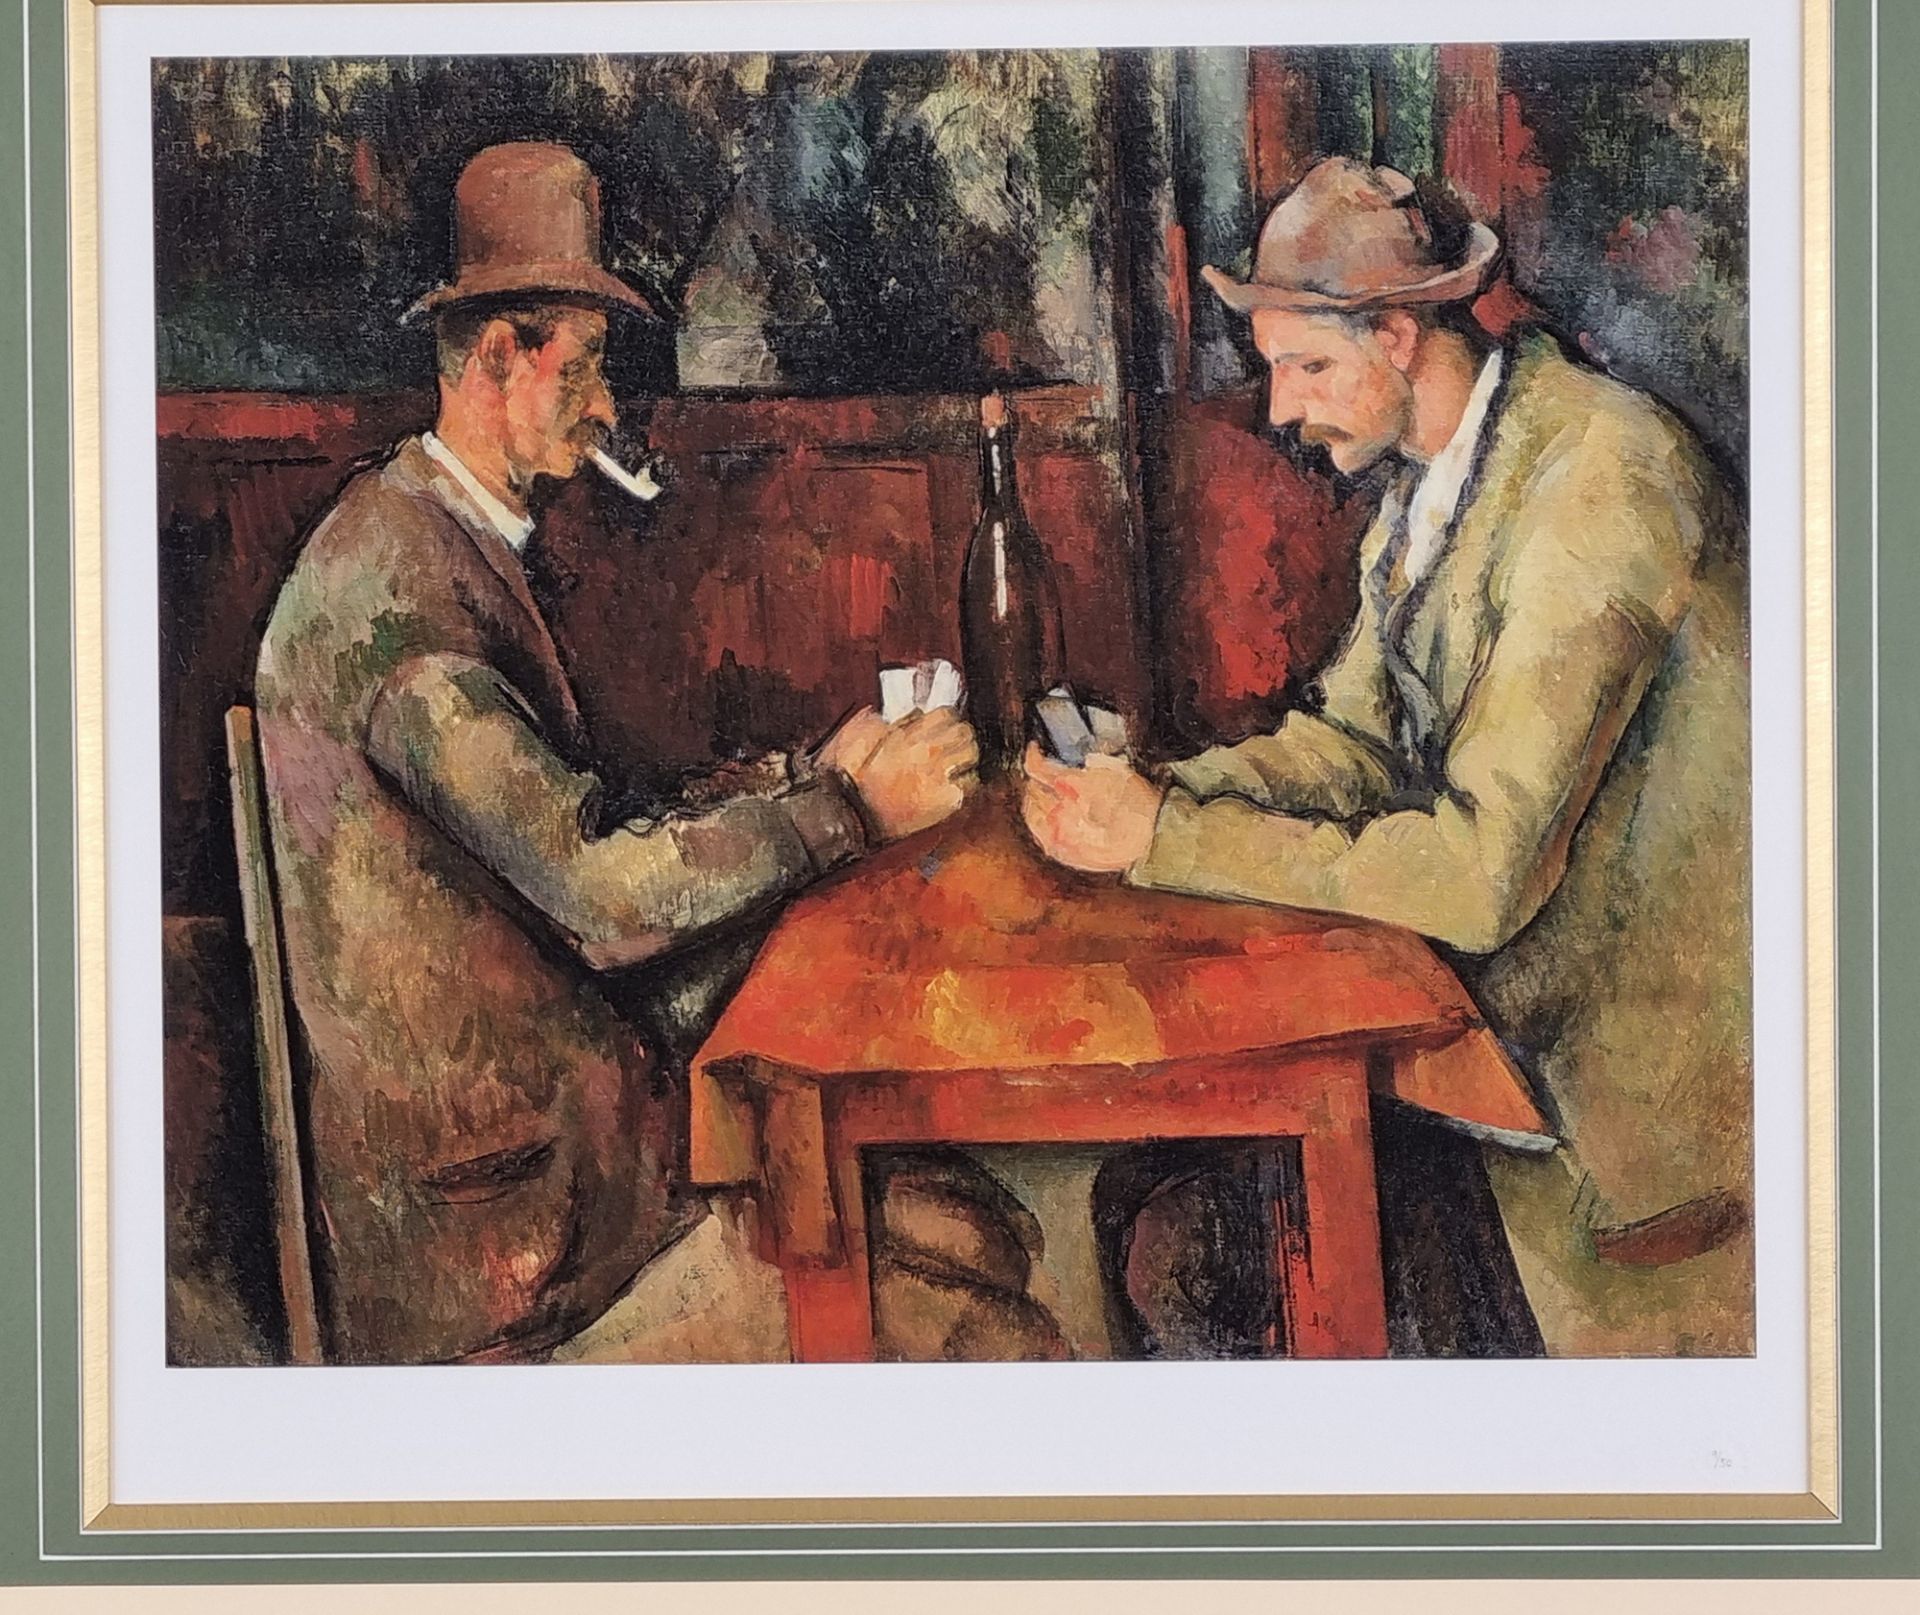 Limited Edition ""The Card Players"" by Paul Cezanne - Image 3 of 10